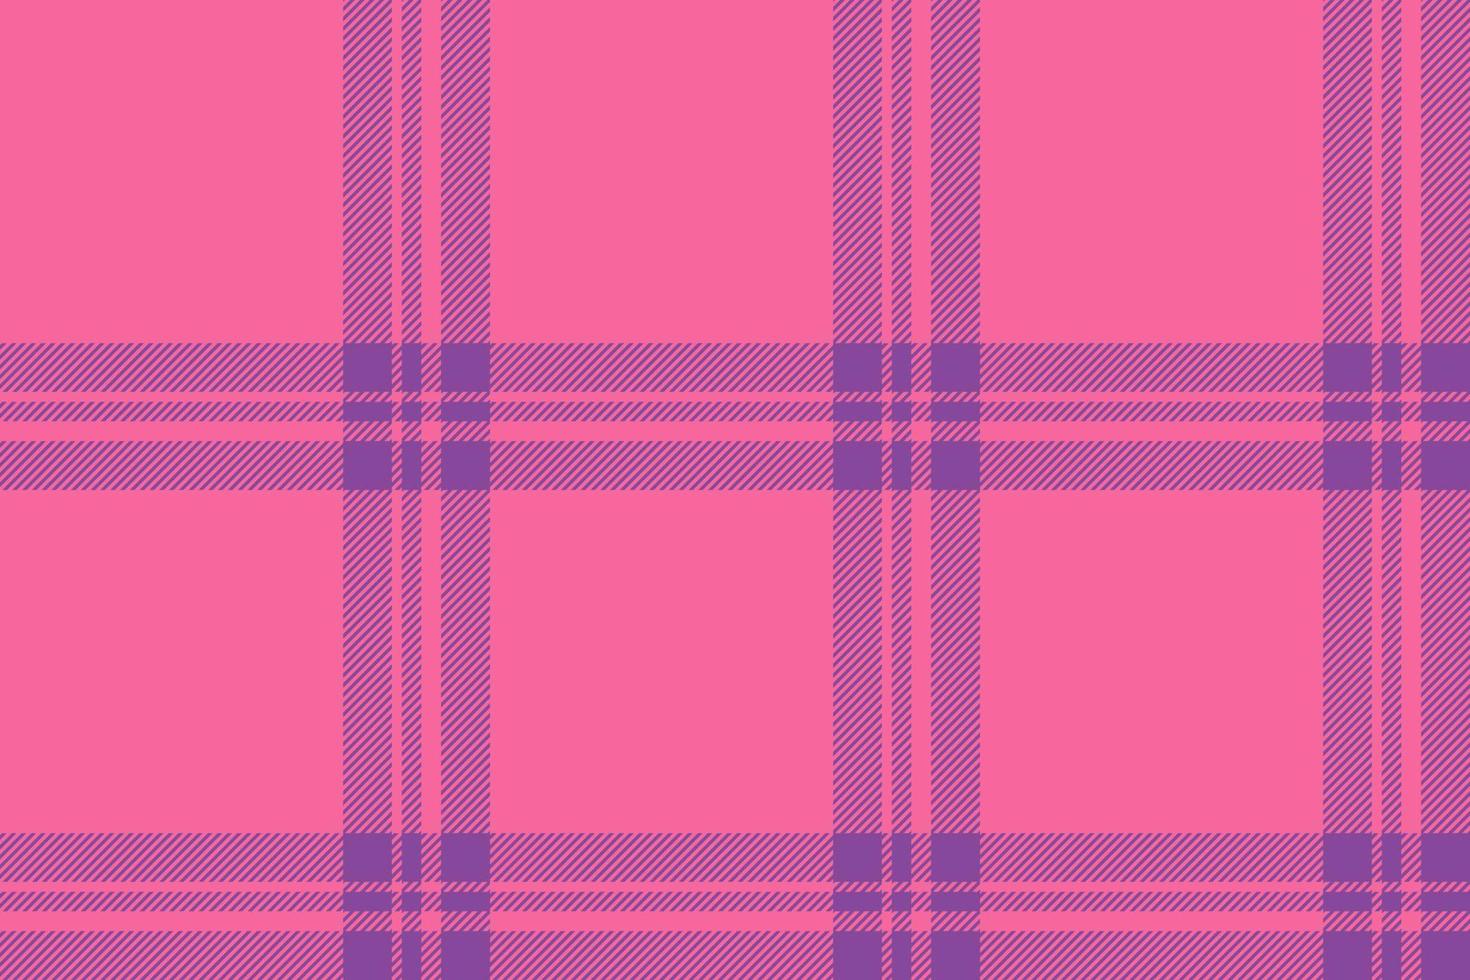 Plaid background, check seamless pattern in pink. Vector fabric texture for textile print, wrapping paper, gift card or wallpaper.